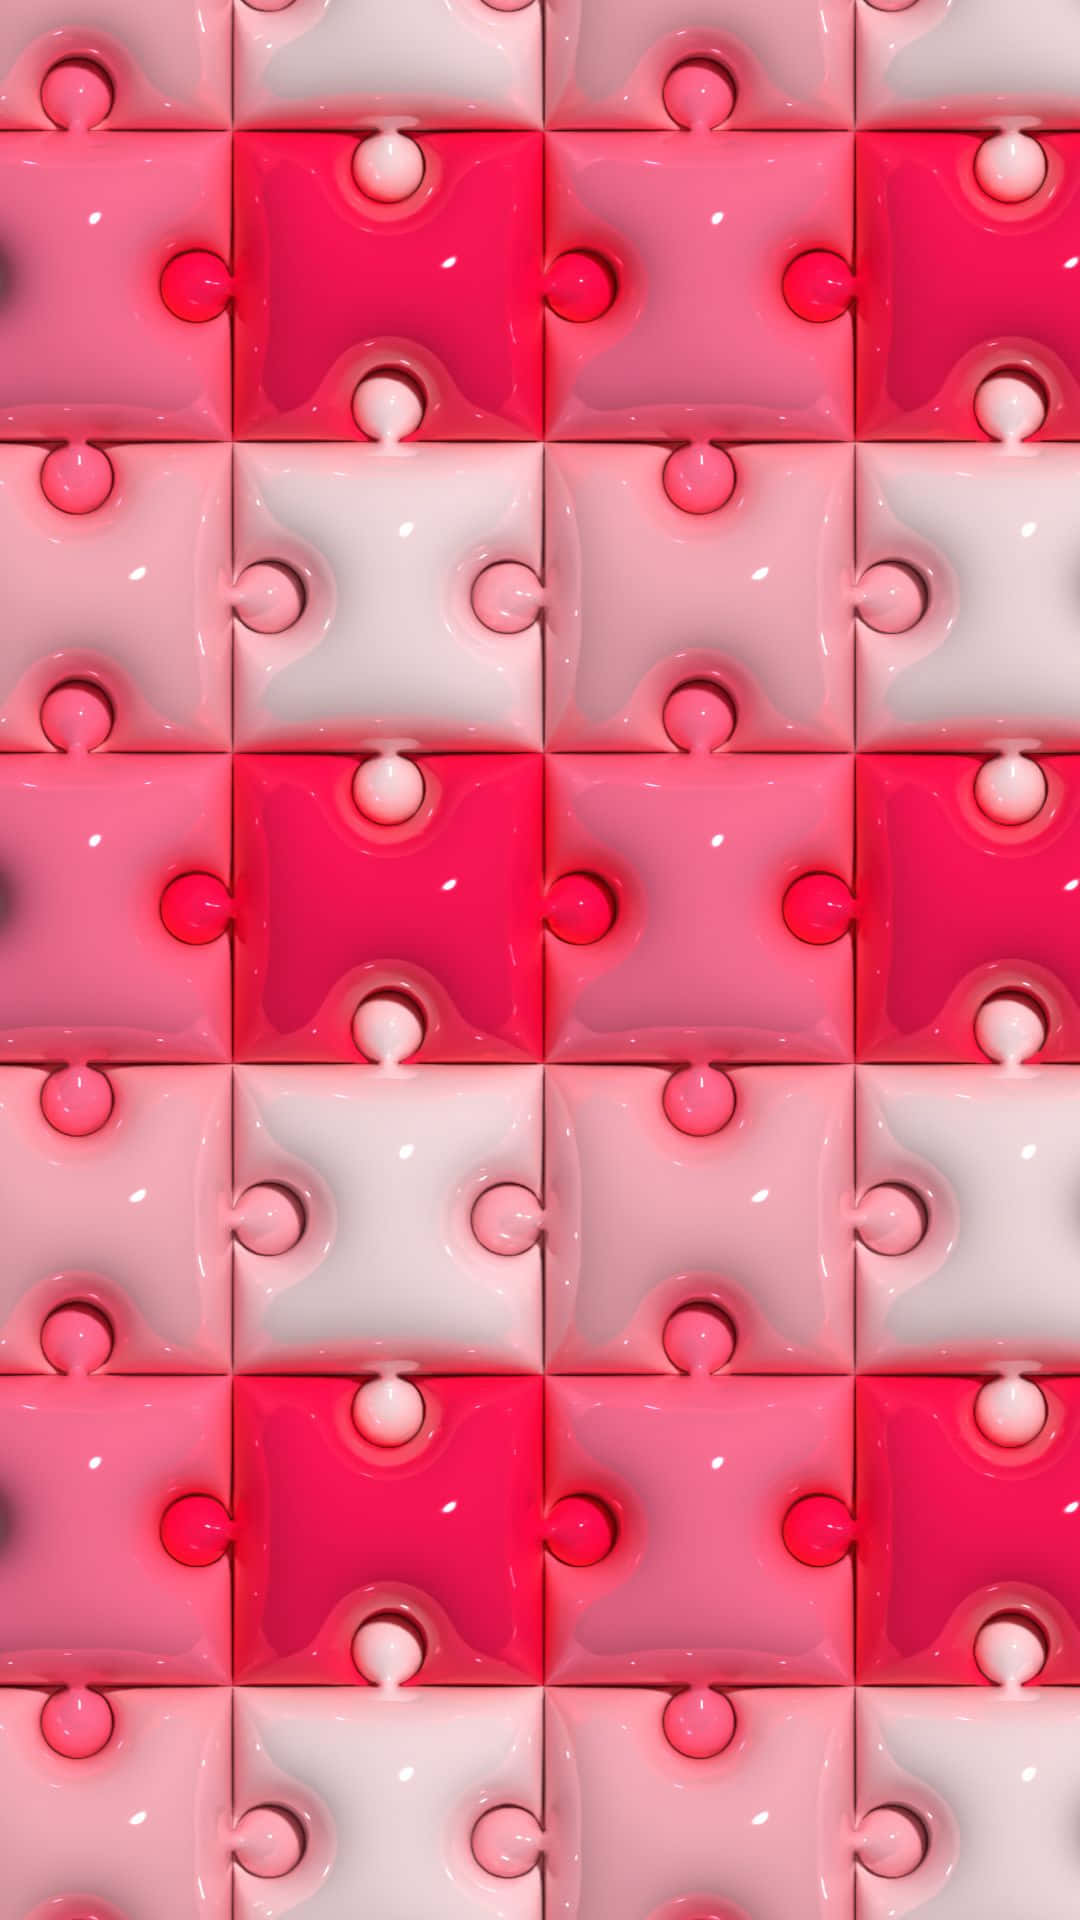 Abstract Pink Puzzle Pattern Wallpaper